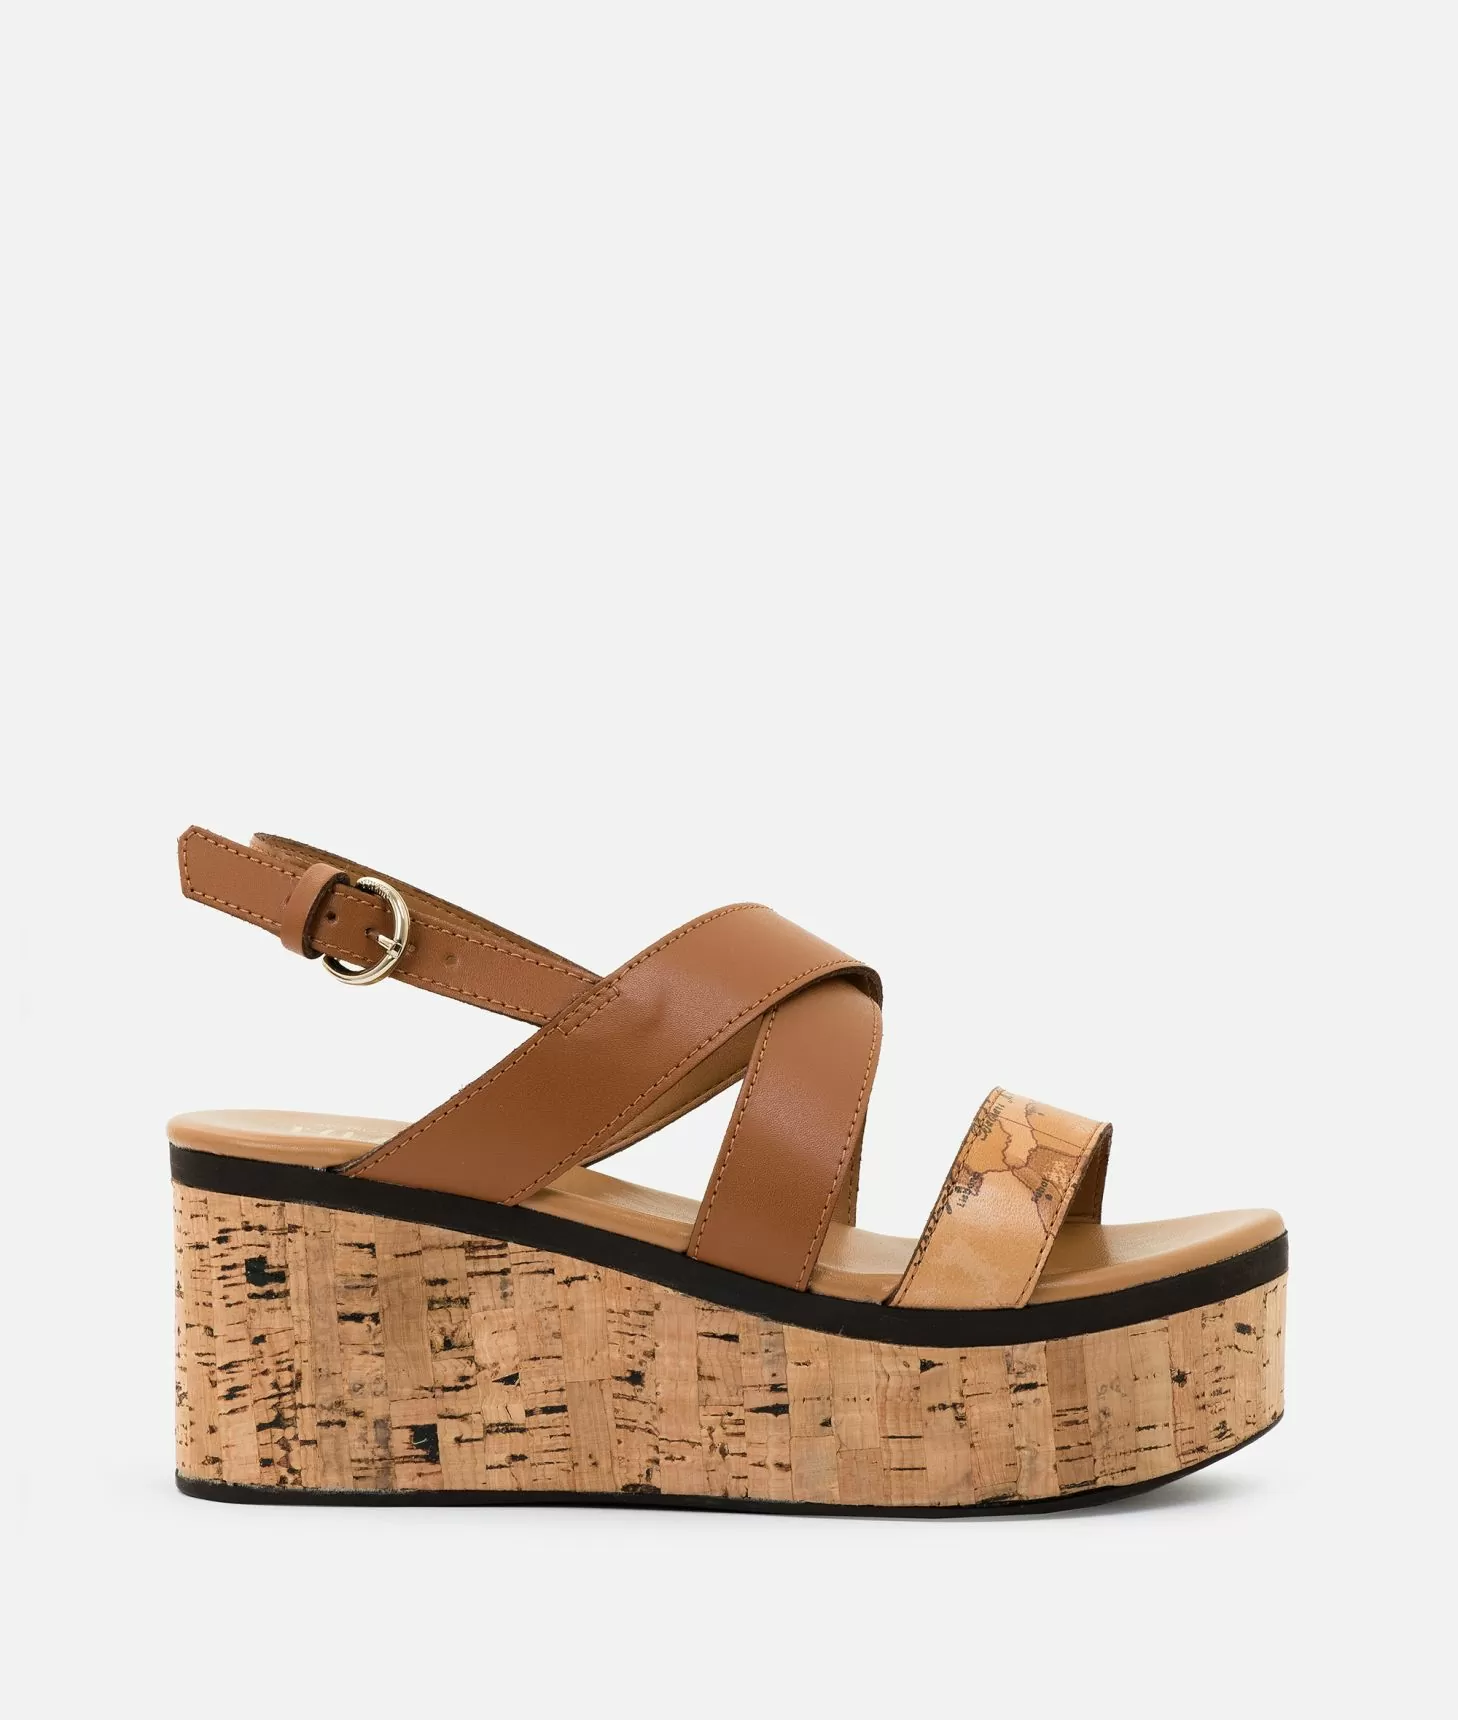 ALVIERO MARTINI PRIMA CLASSE - Wedge sandal in smooth cowhide leather Brown